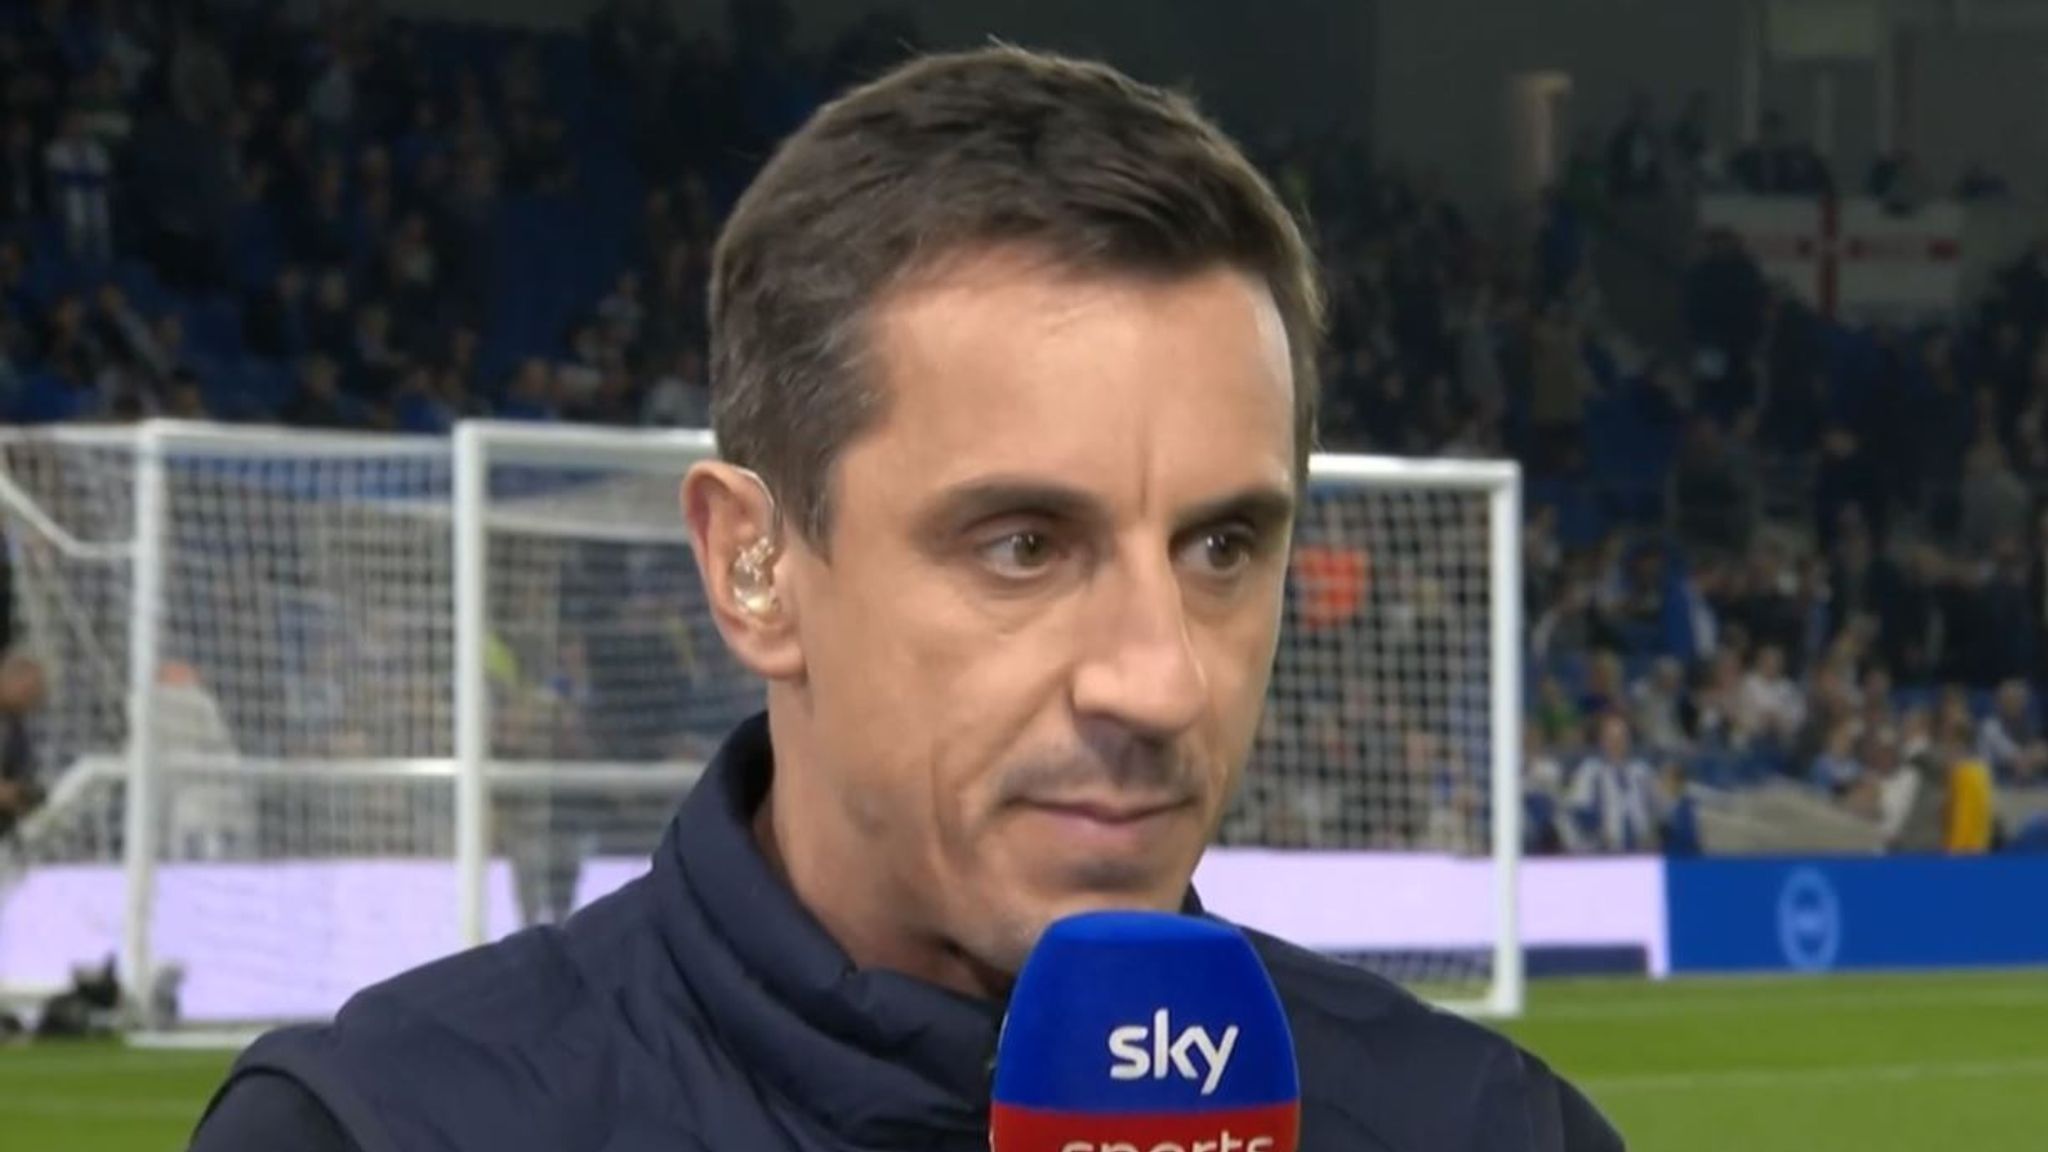 Gary Neville claims it would be “extreme” if Manchester United sacked Erik ten Hag after winning the FA Cup